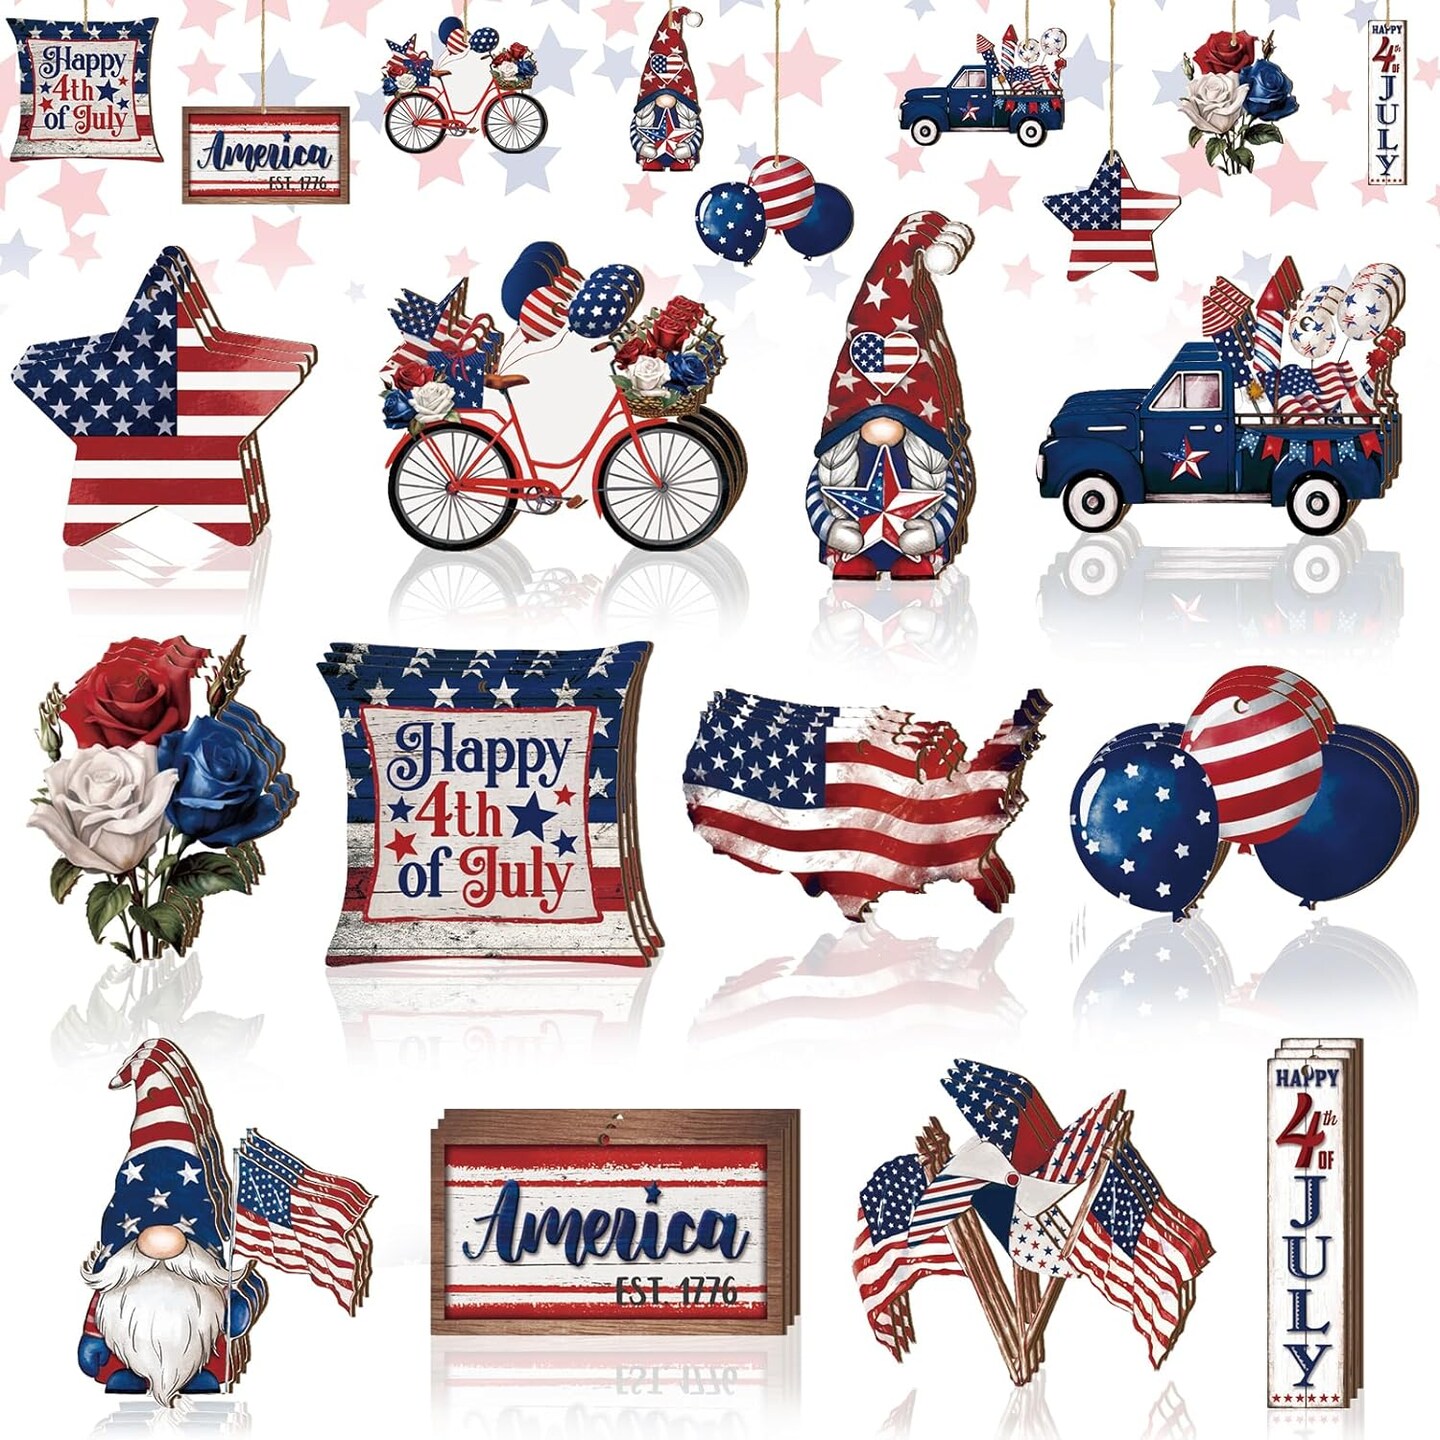 36 Pieces 4th of July Patriotic Wooden American Flag Ornaments for Trees